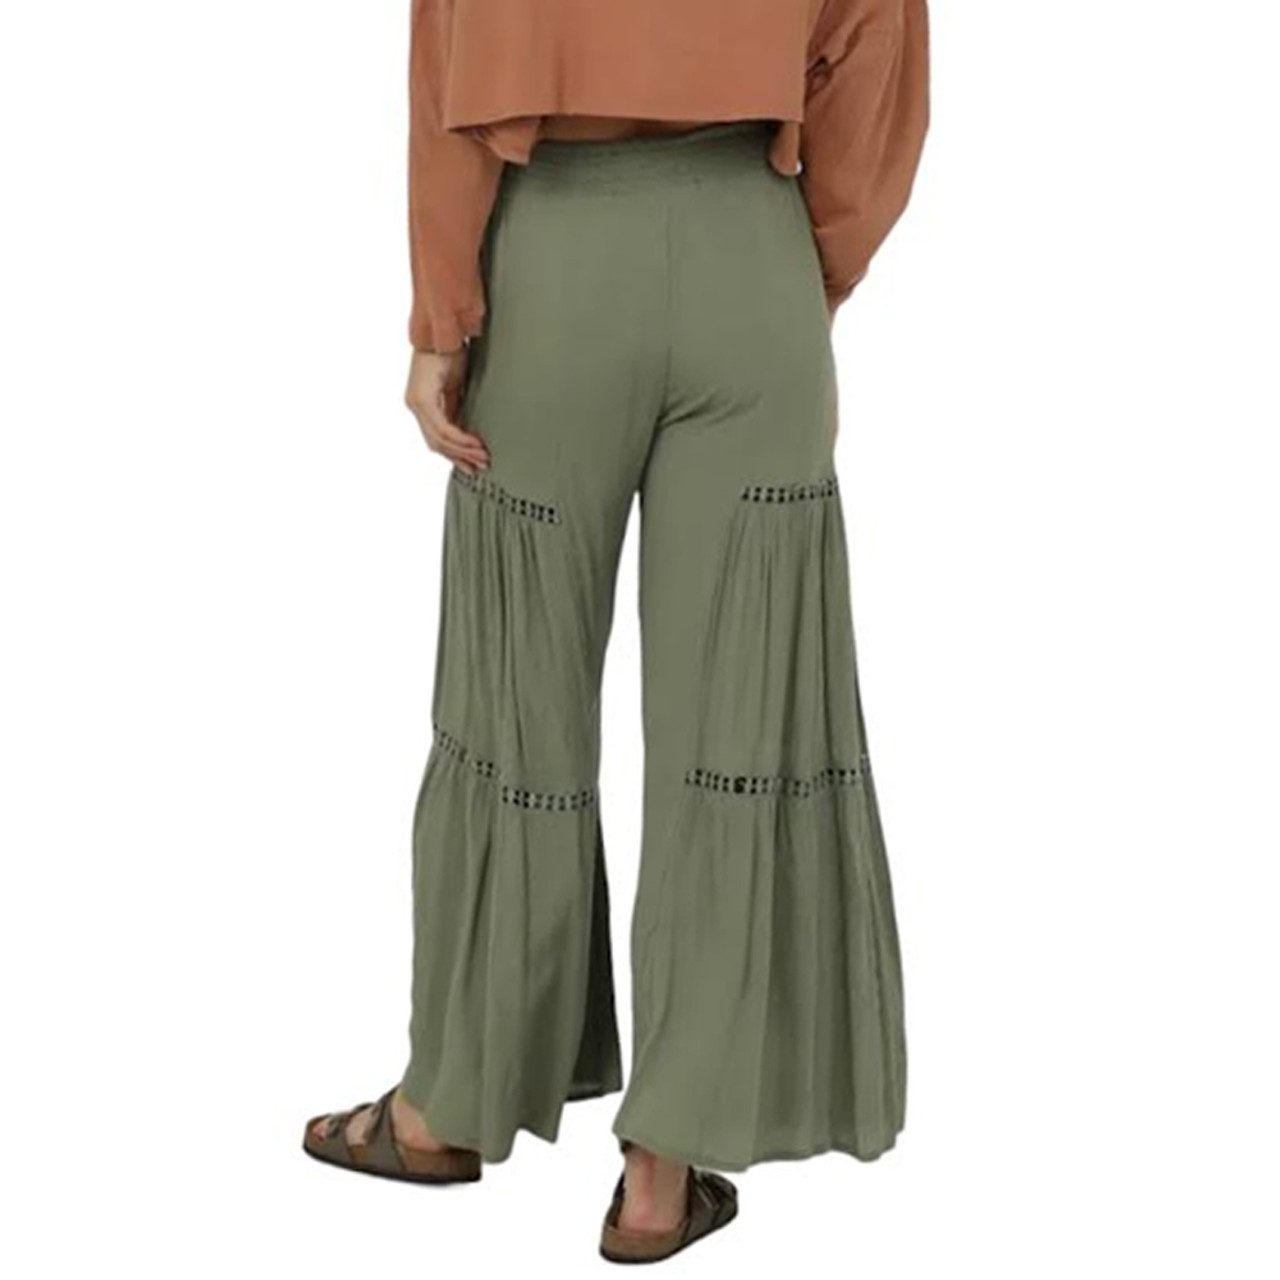 Angie Floral Wide Leg Pants with Lace Inserts